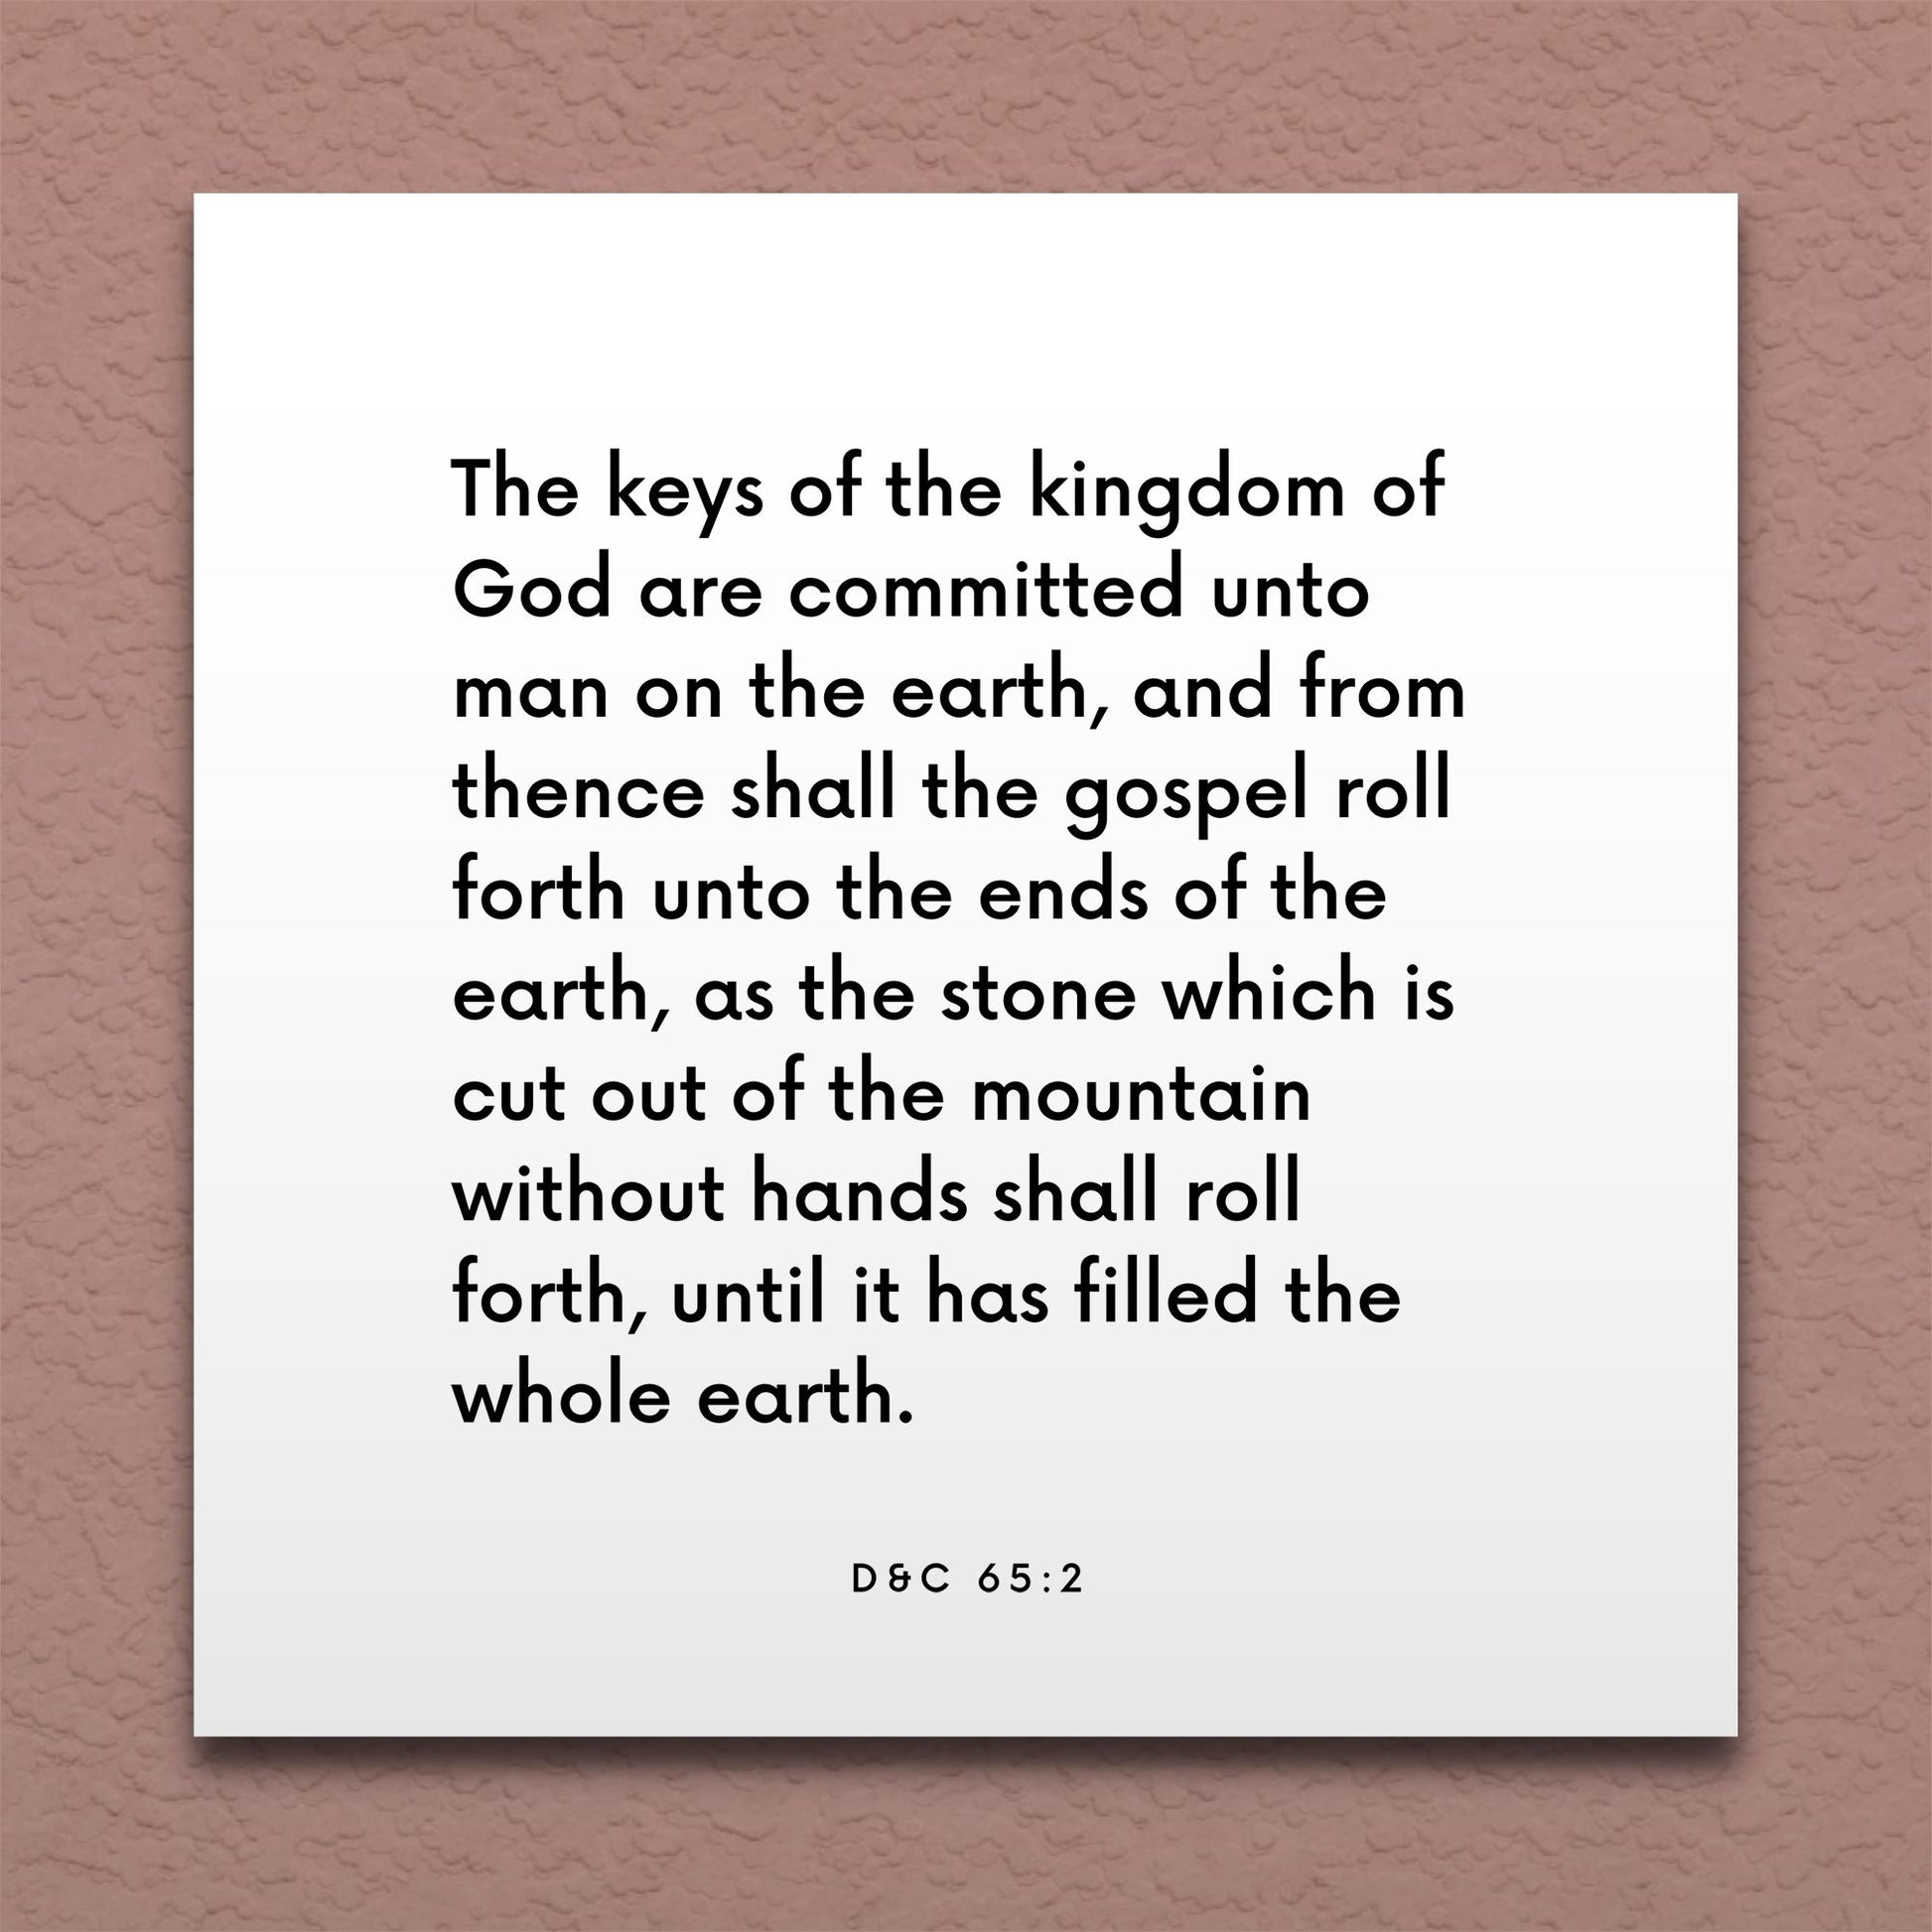 Wall-mounted scripture tile for D&C 65:2 - "The keys of the kingdom of God are committed unto man"